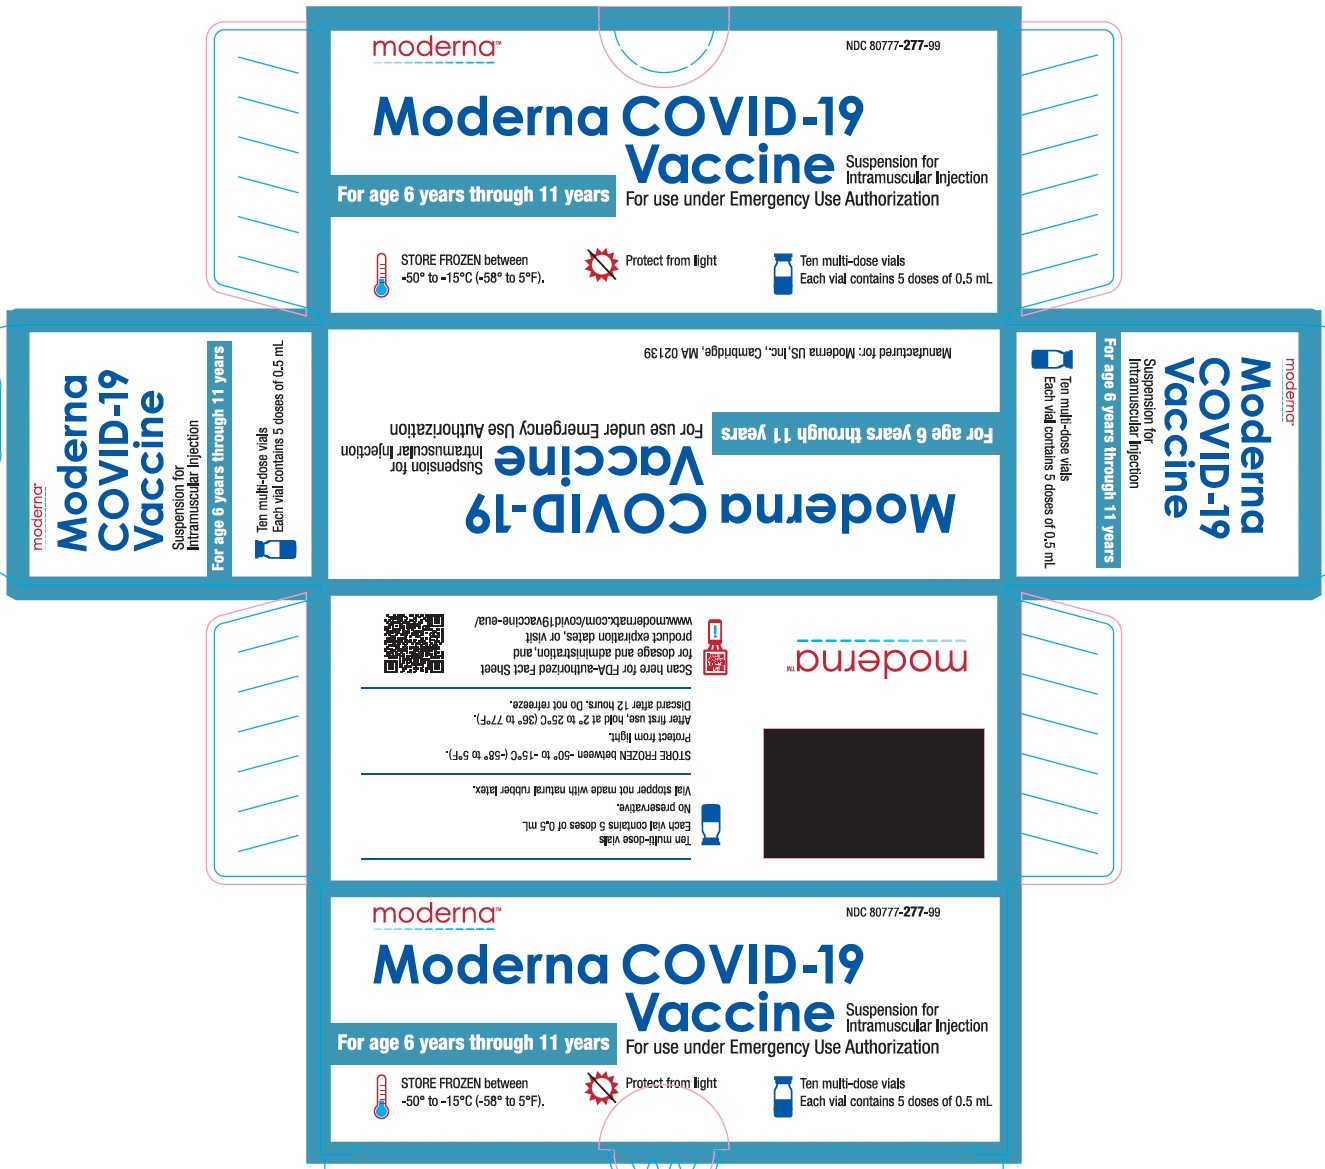 Moderna COVID-19 Vaccine Suspension for Intramuscular Injection for use under Emergency Use Authorization-Age 6y through 11y Carton (5 doses of 0.5 mL)